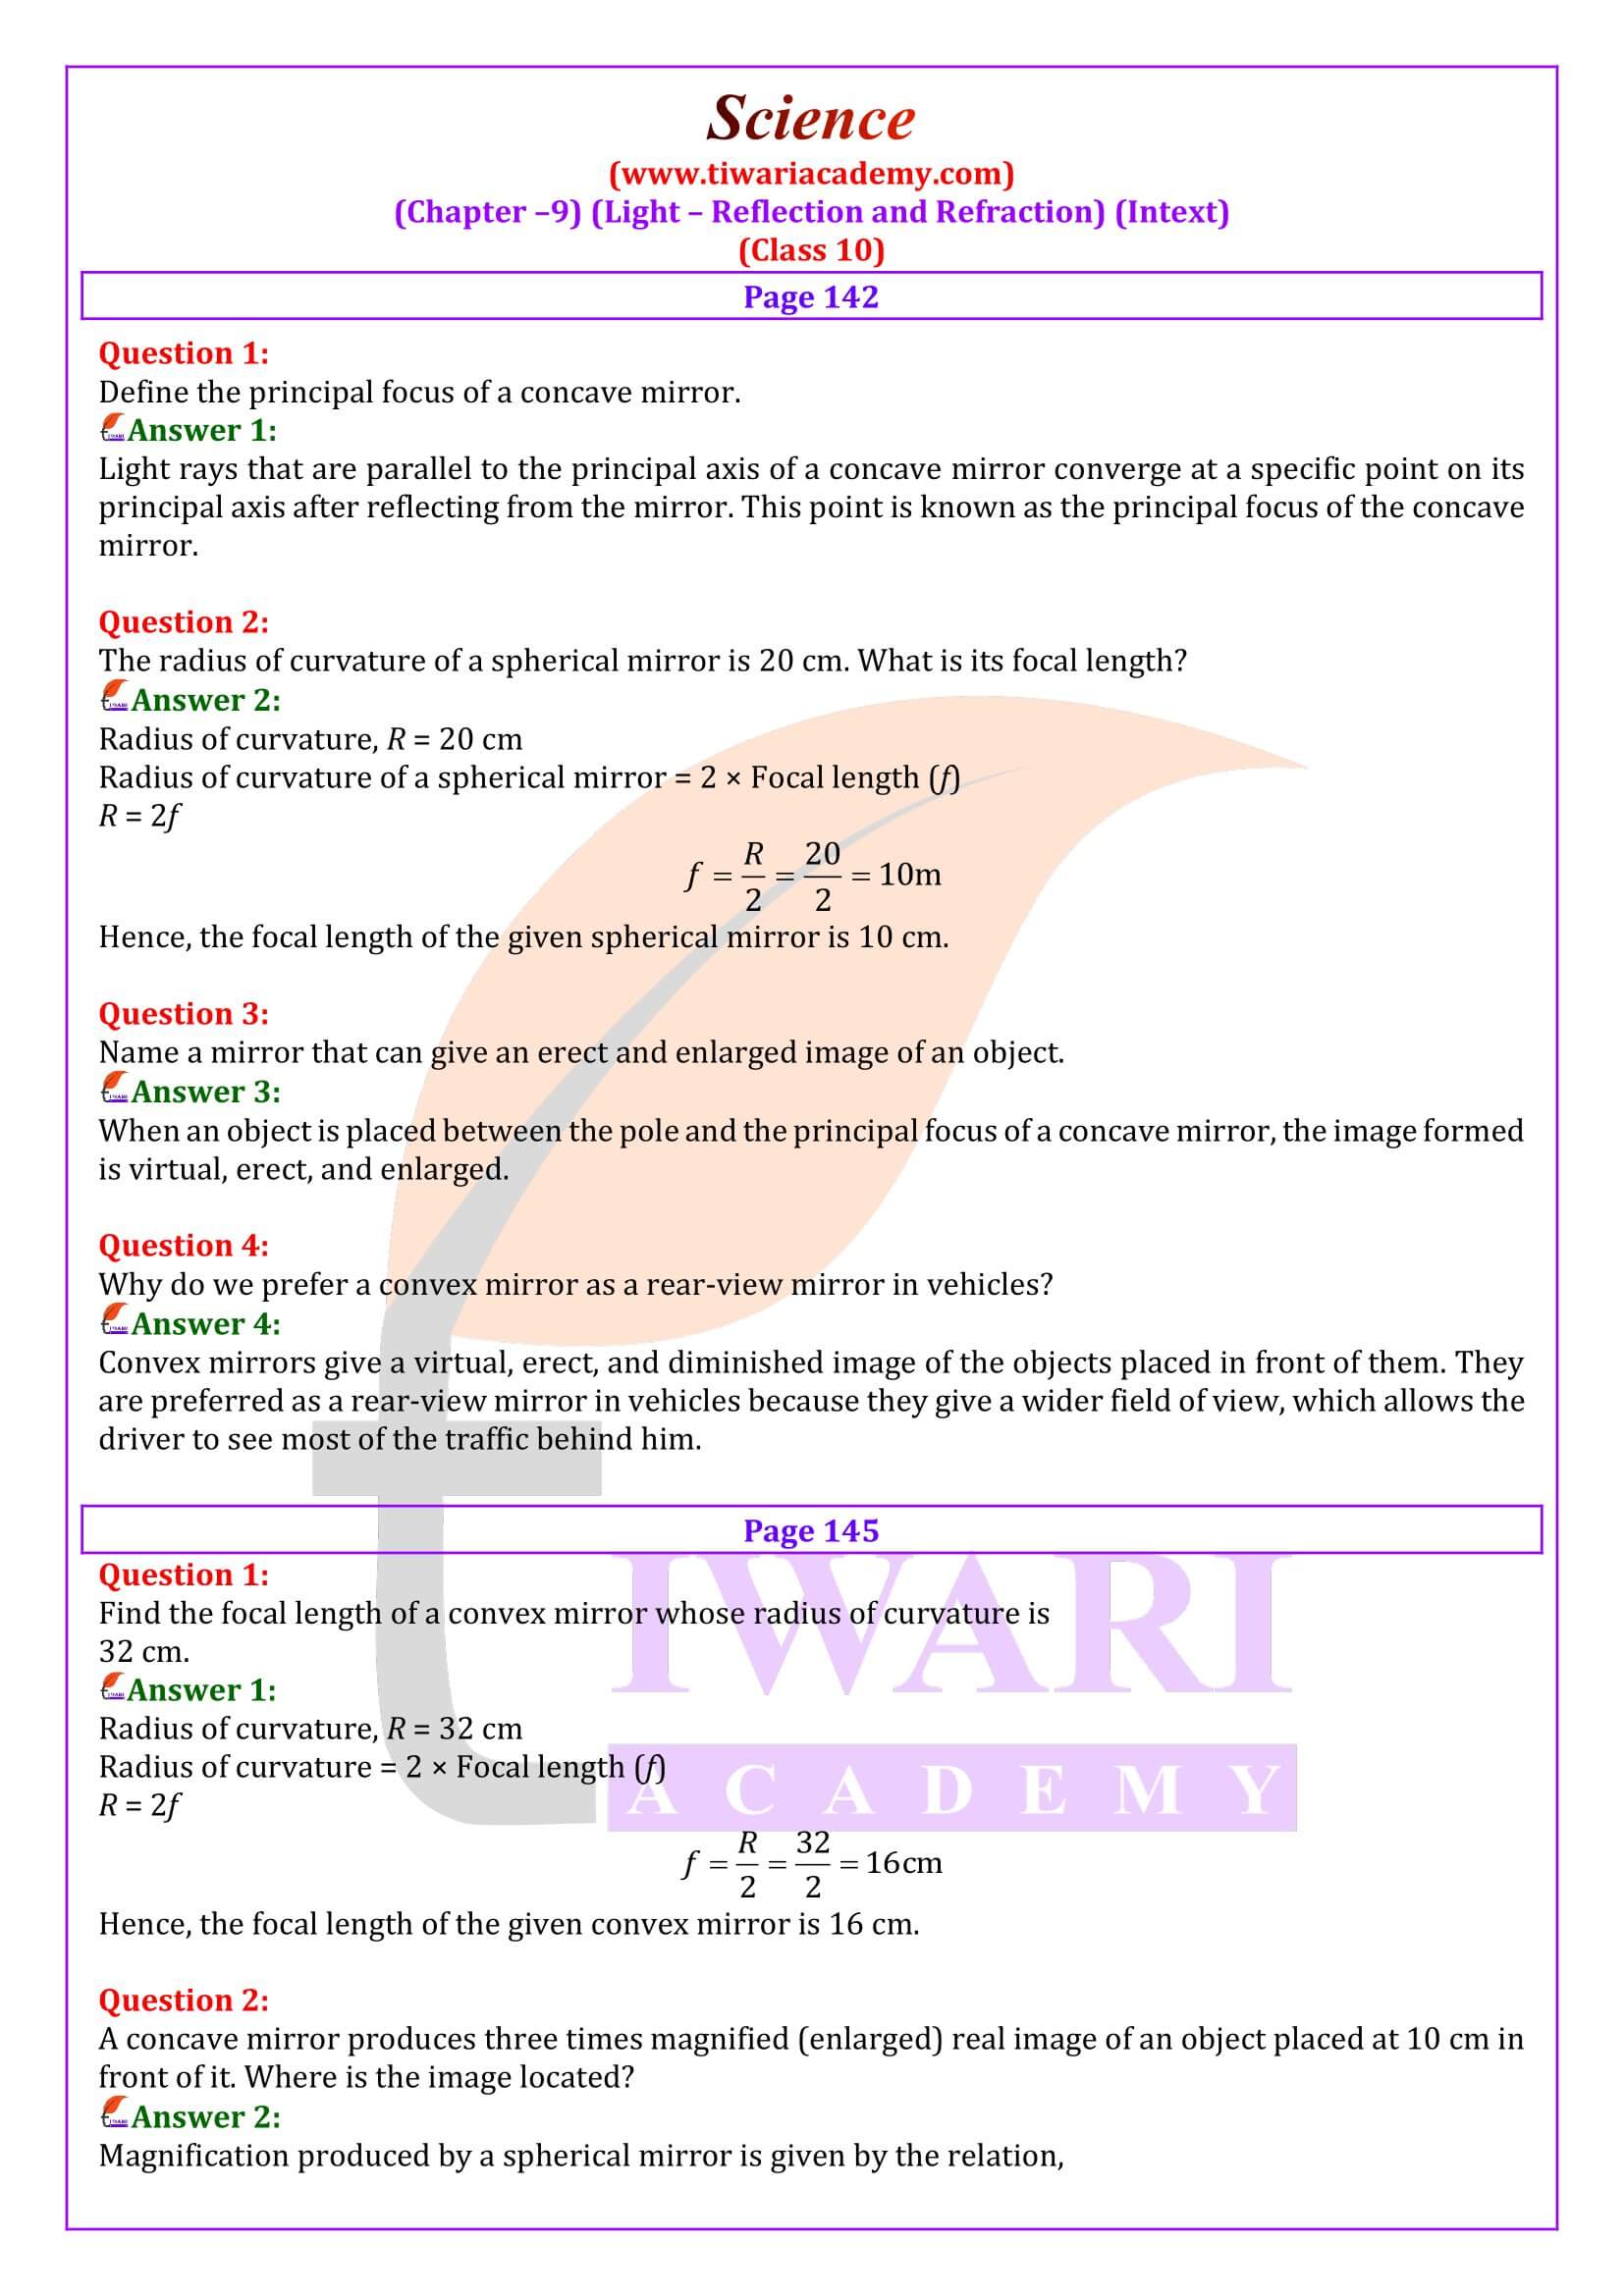 NCERT Solutions for Class 10 Science Chapter 9 Intext Questions